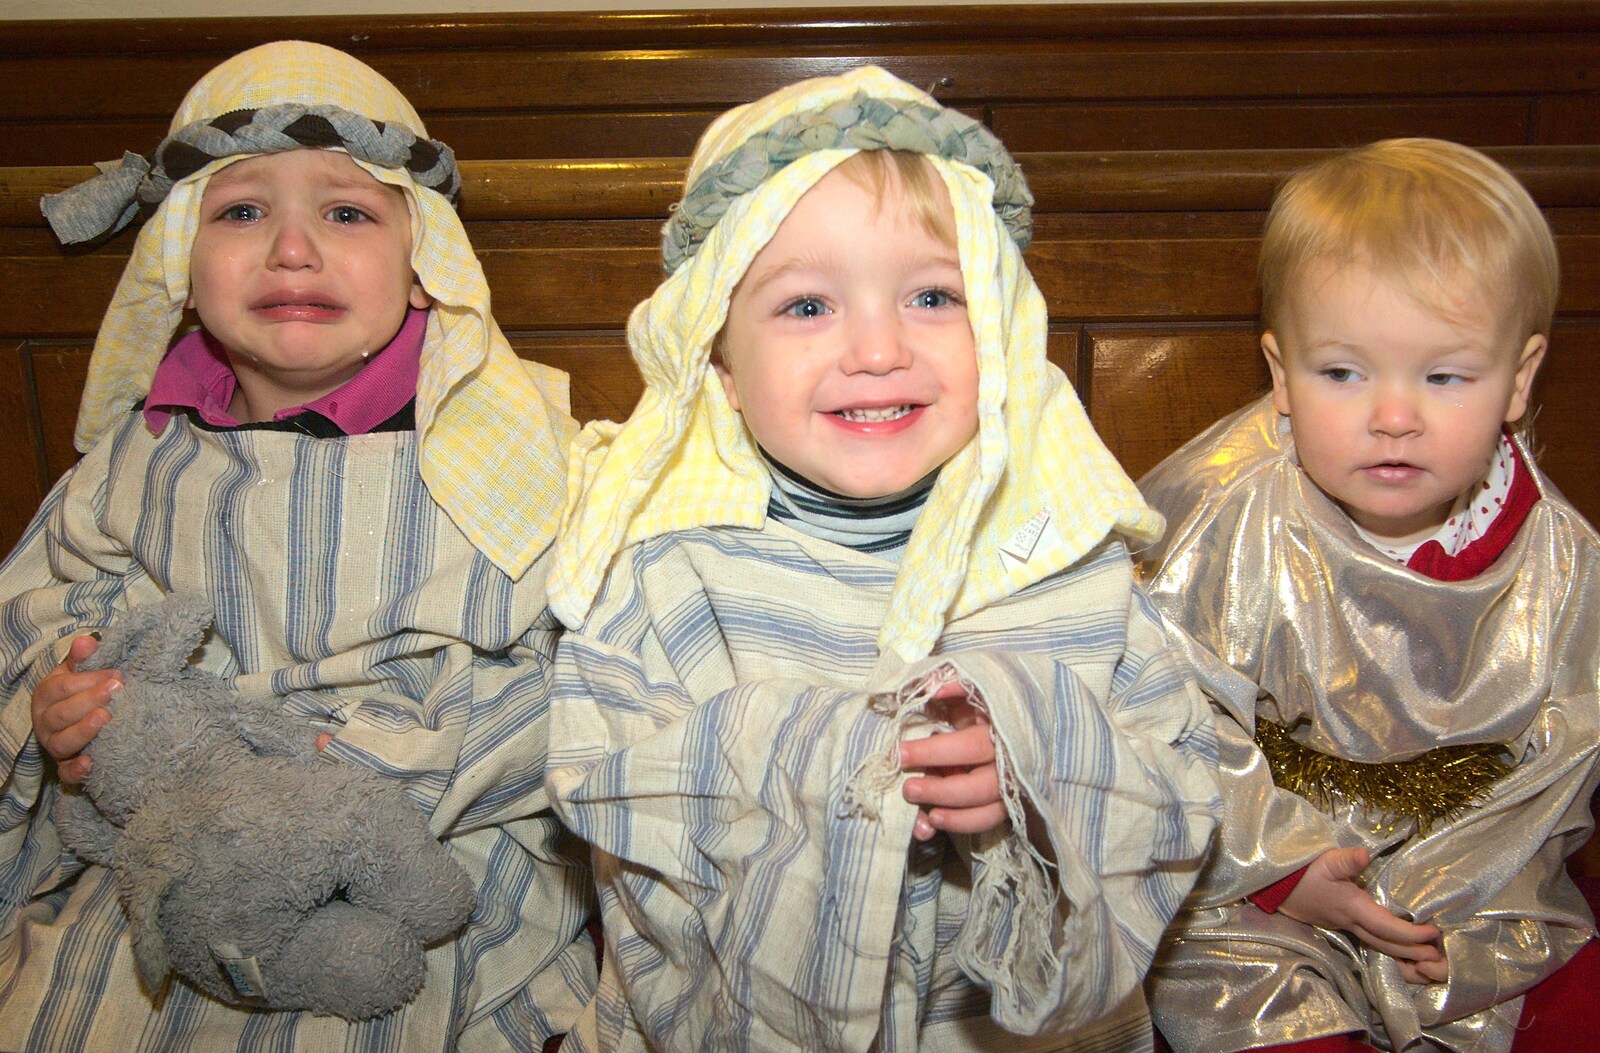 Fred's into it, the kid on the left, less so from Fred's First Nativity, St. Peter's Church, Palgrave, Suffolk - 8th December 2011